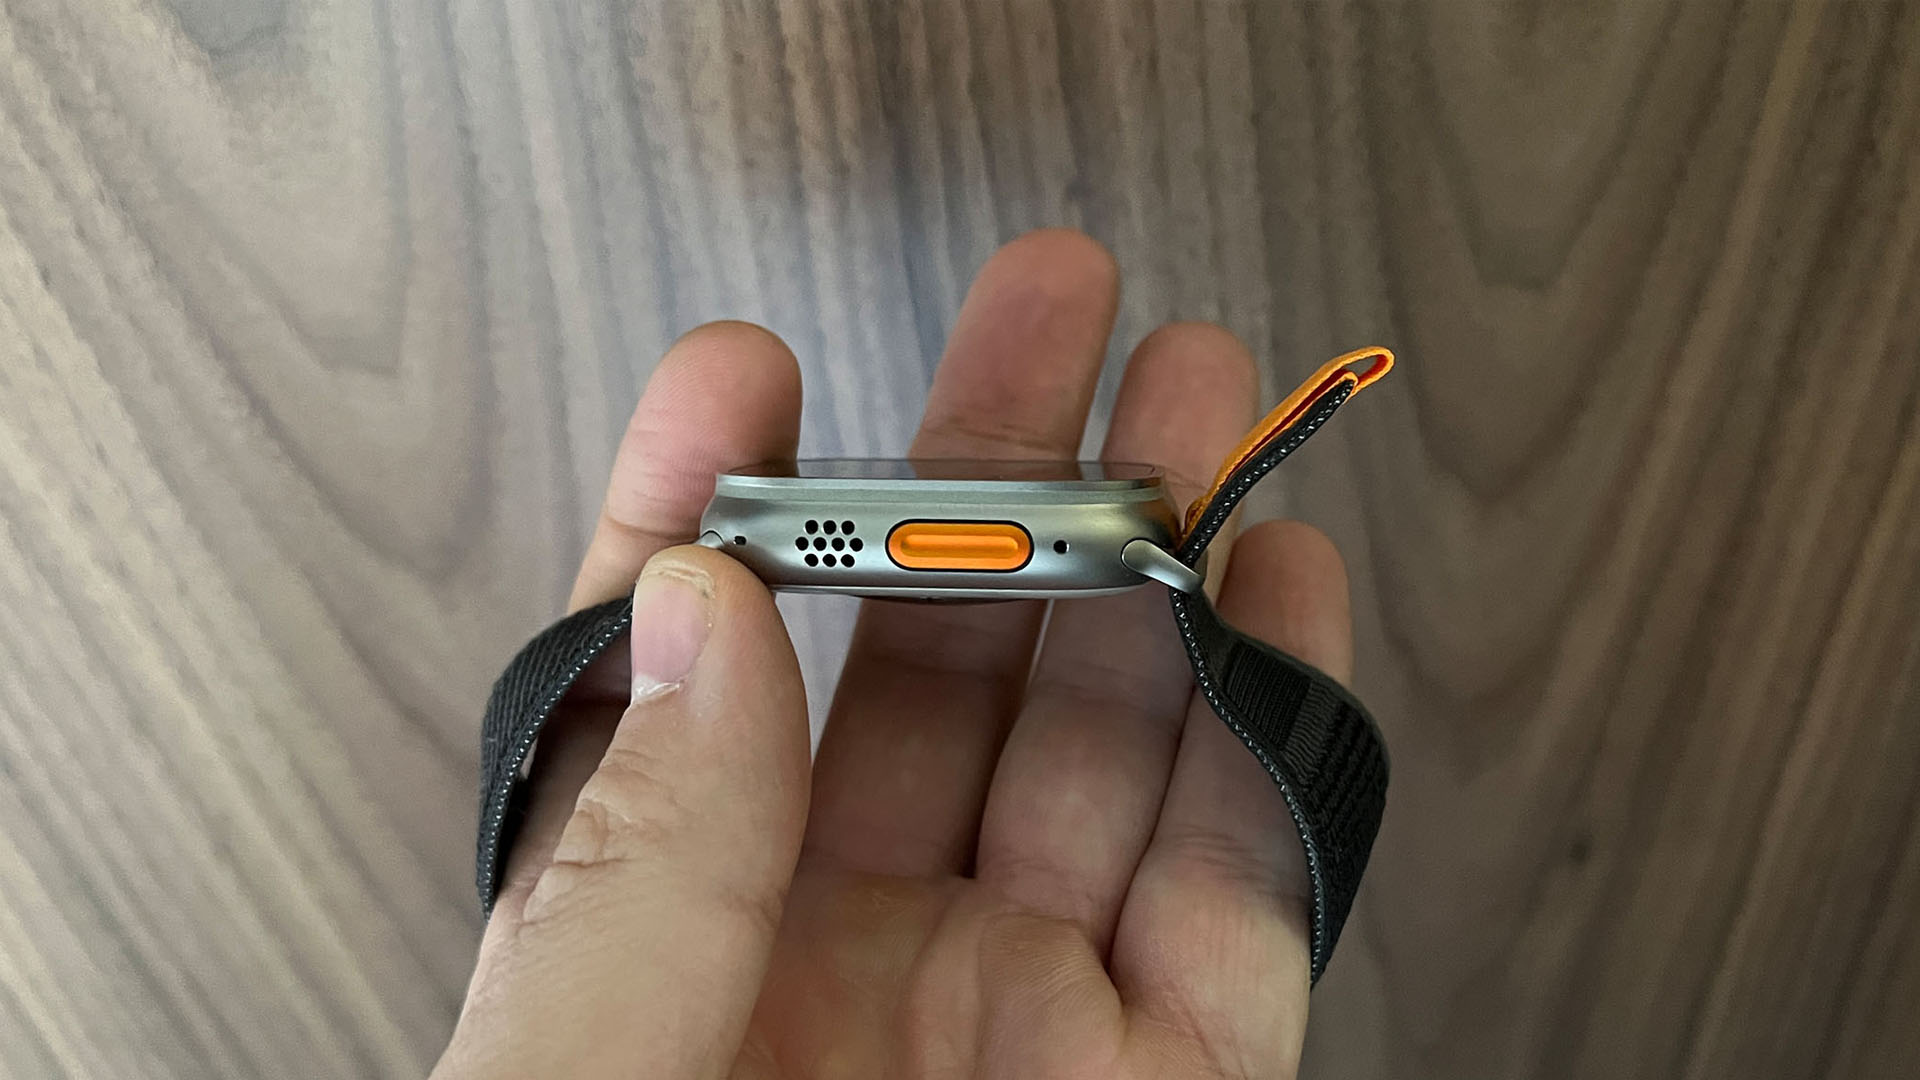 Apple Watch Ultra being tested by Live Science contributor Lloyd Coombes